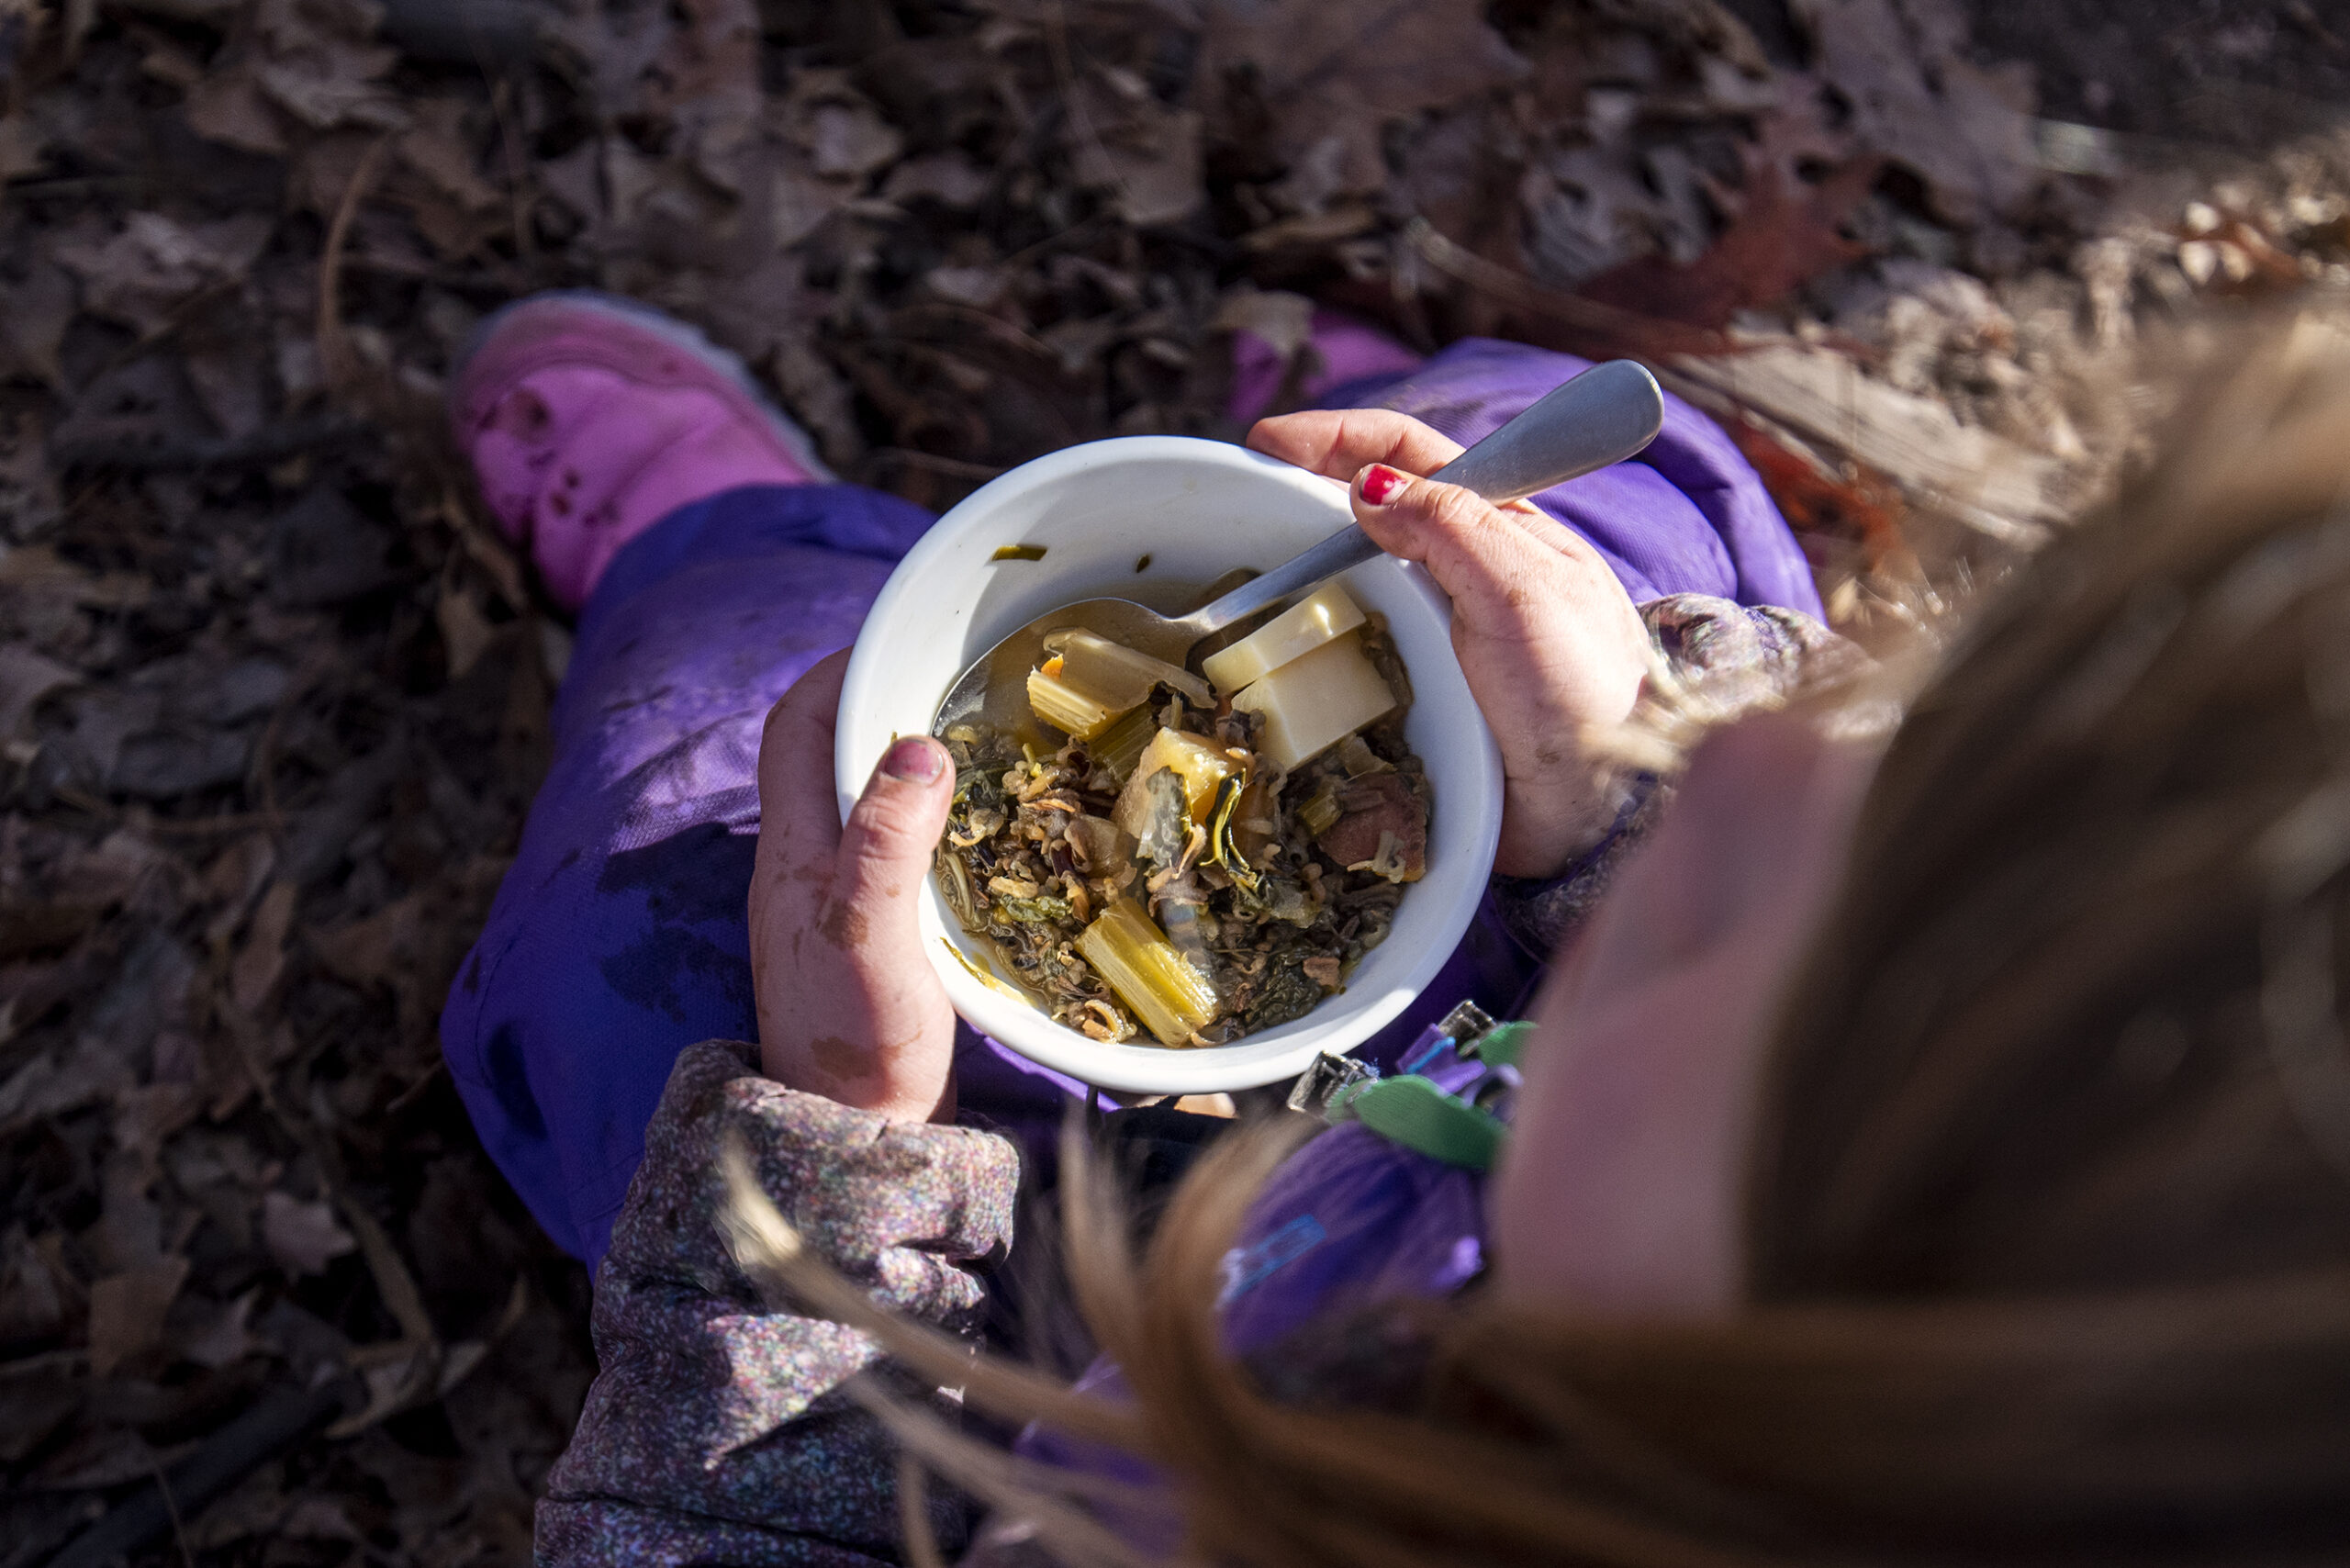 A bowl of soup can be seen from above as a small child holds it.